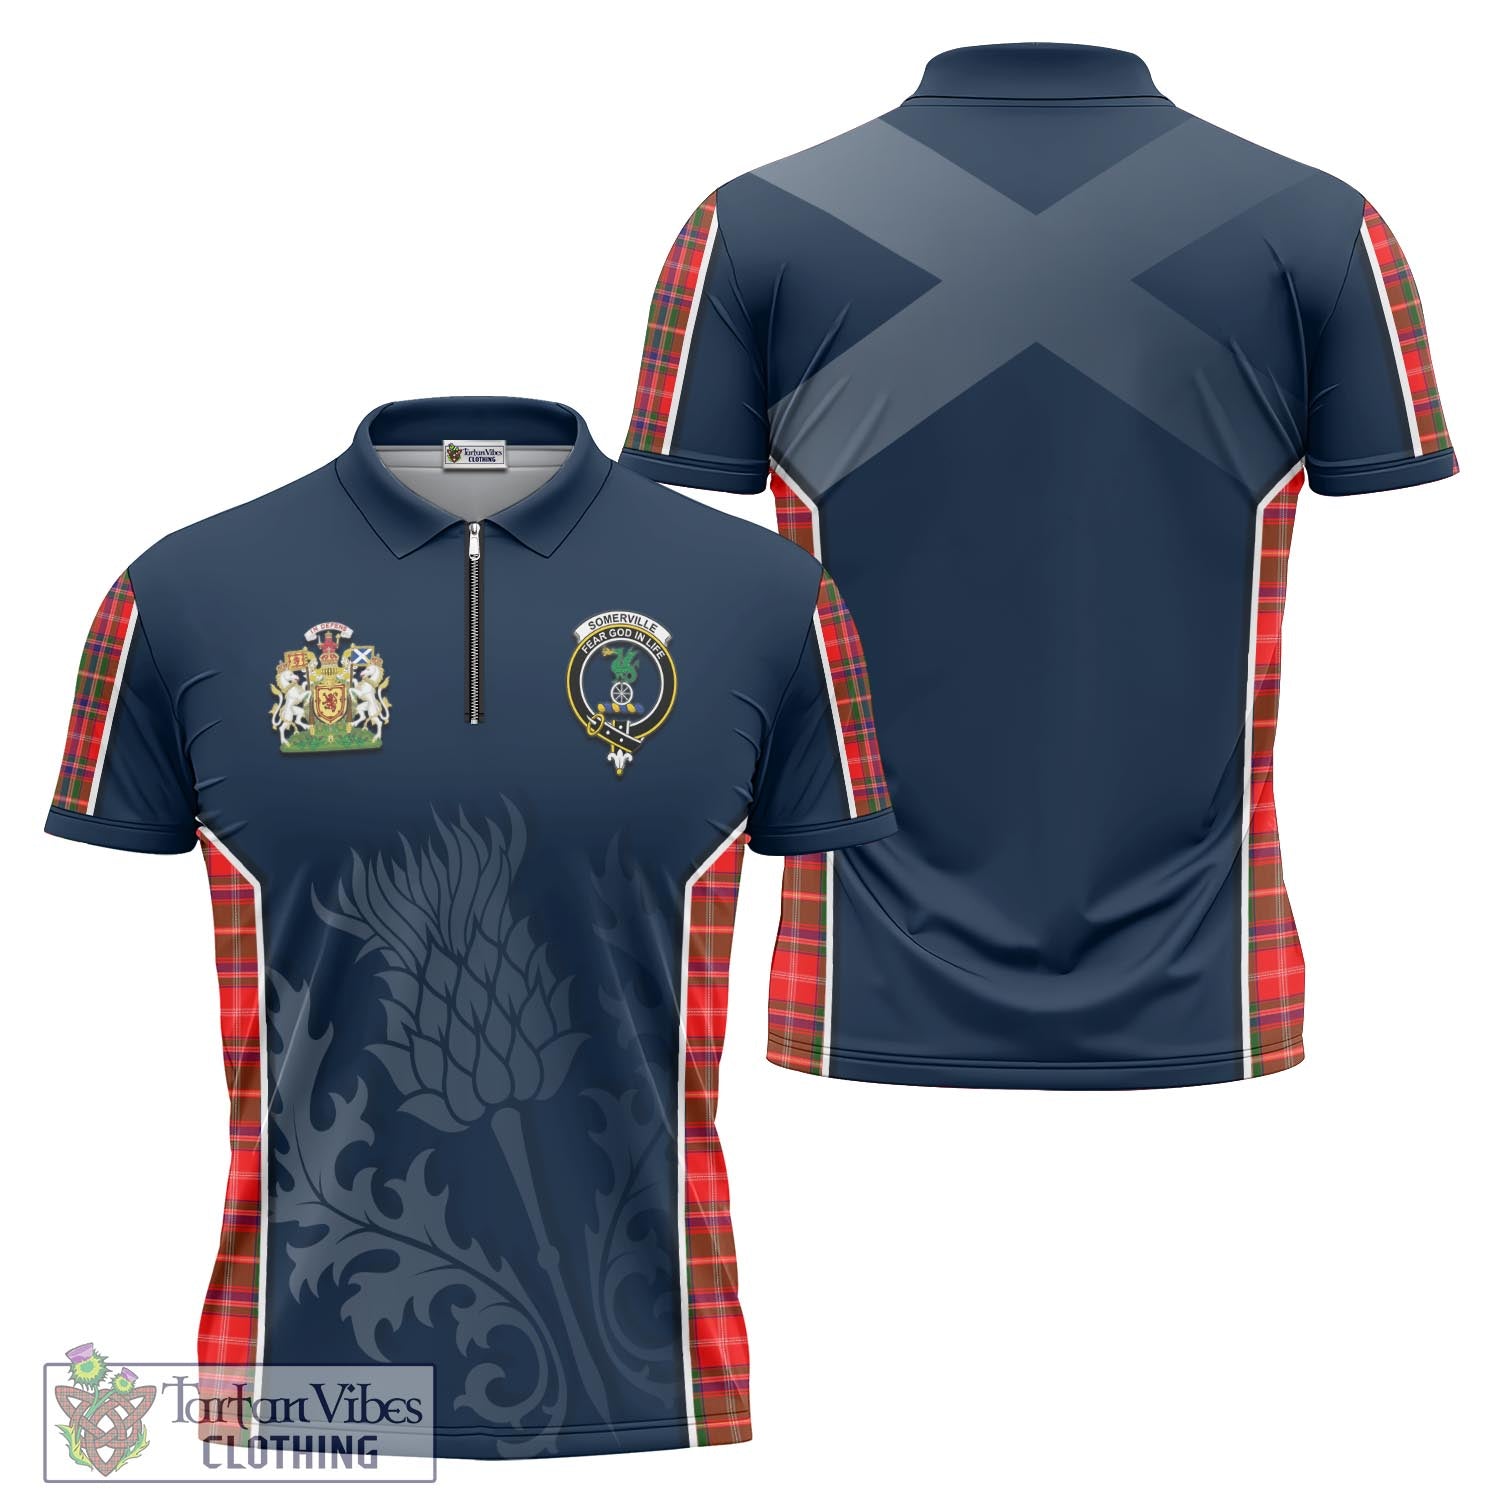 Tartan Vibes Clothing Somerville Modern Tartan Zipper Polo Shirt with Family Crest and Scottish Thistle Vibes Sport Style